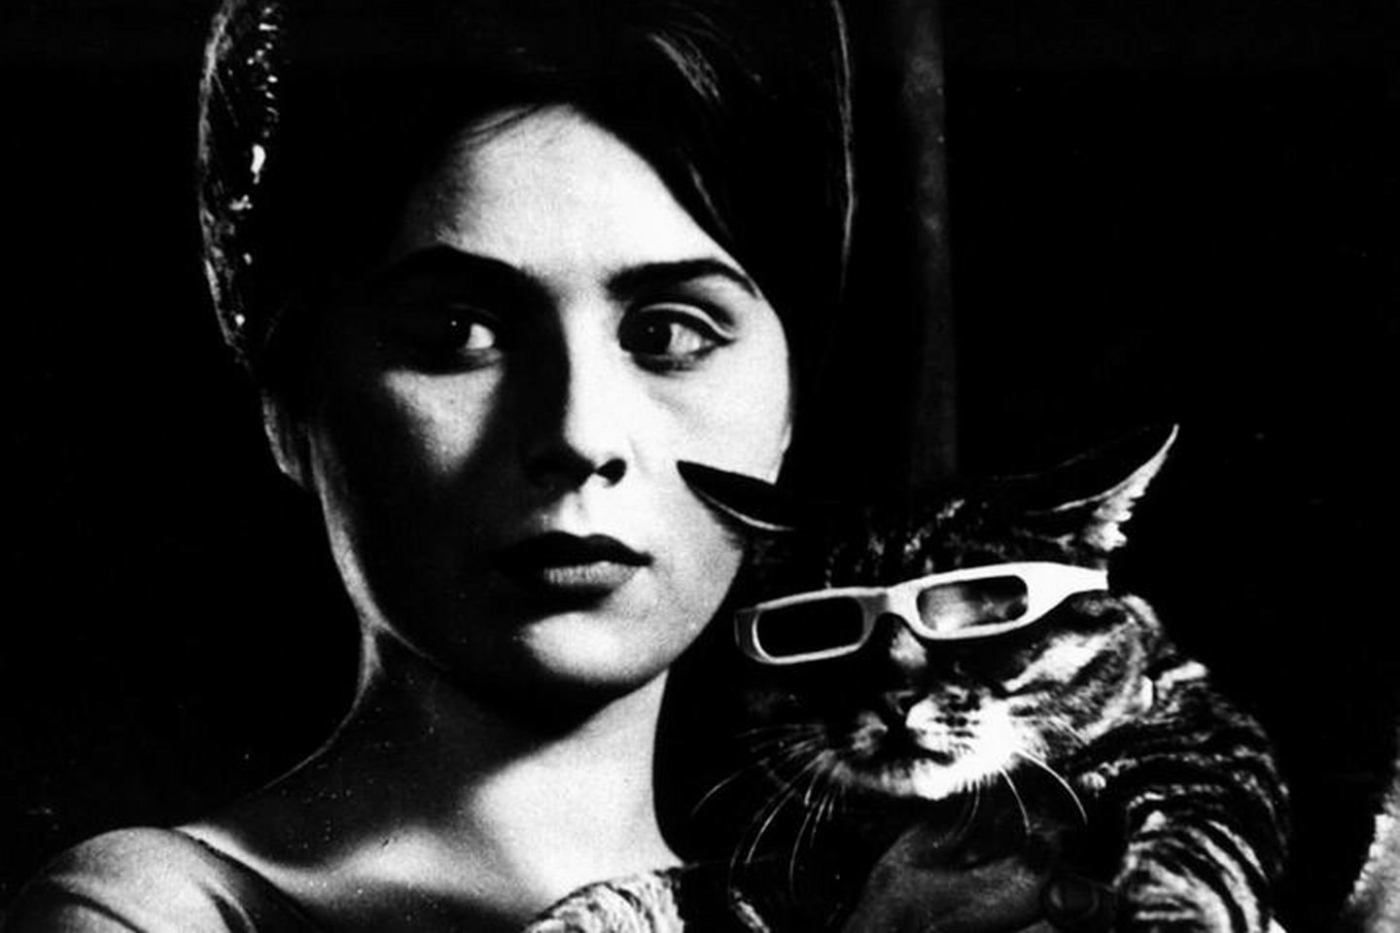 Cult classic Czech film about a cat who wears sunglasses gets new UK blu-ray